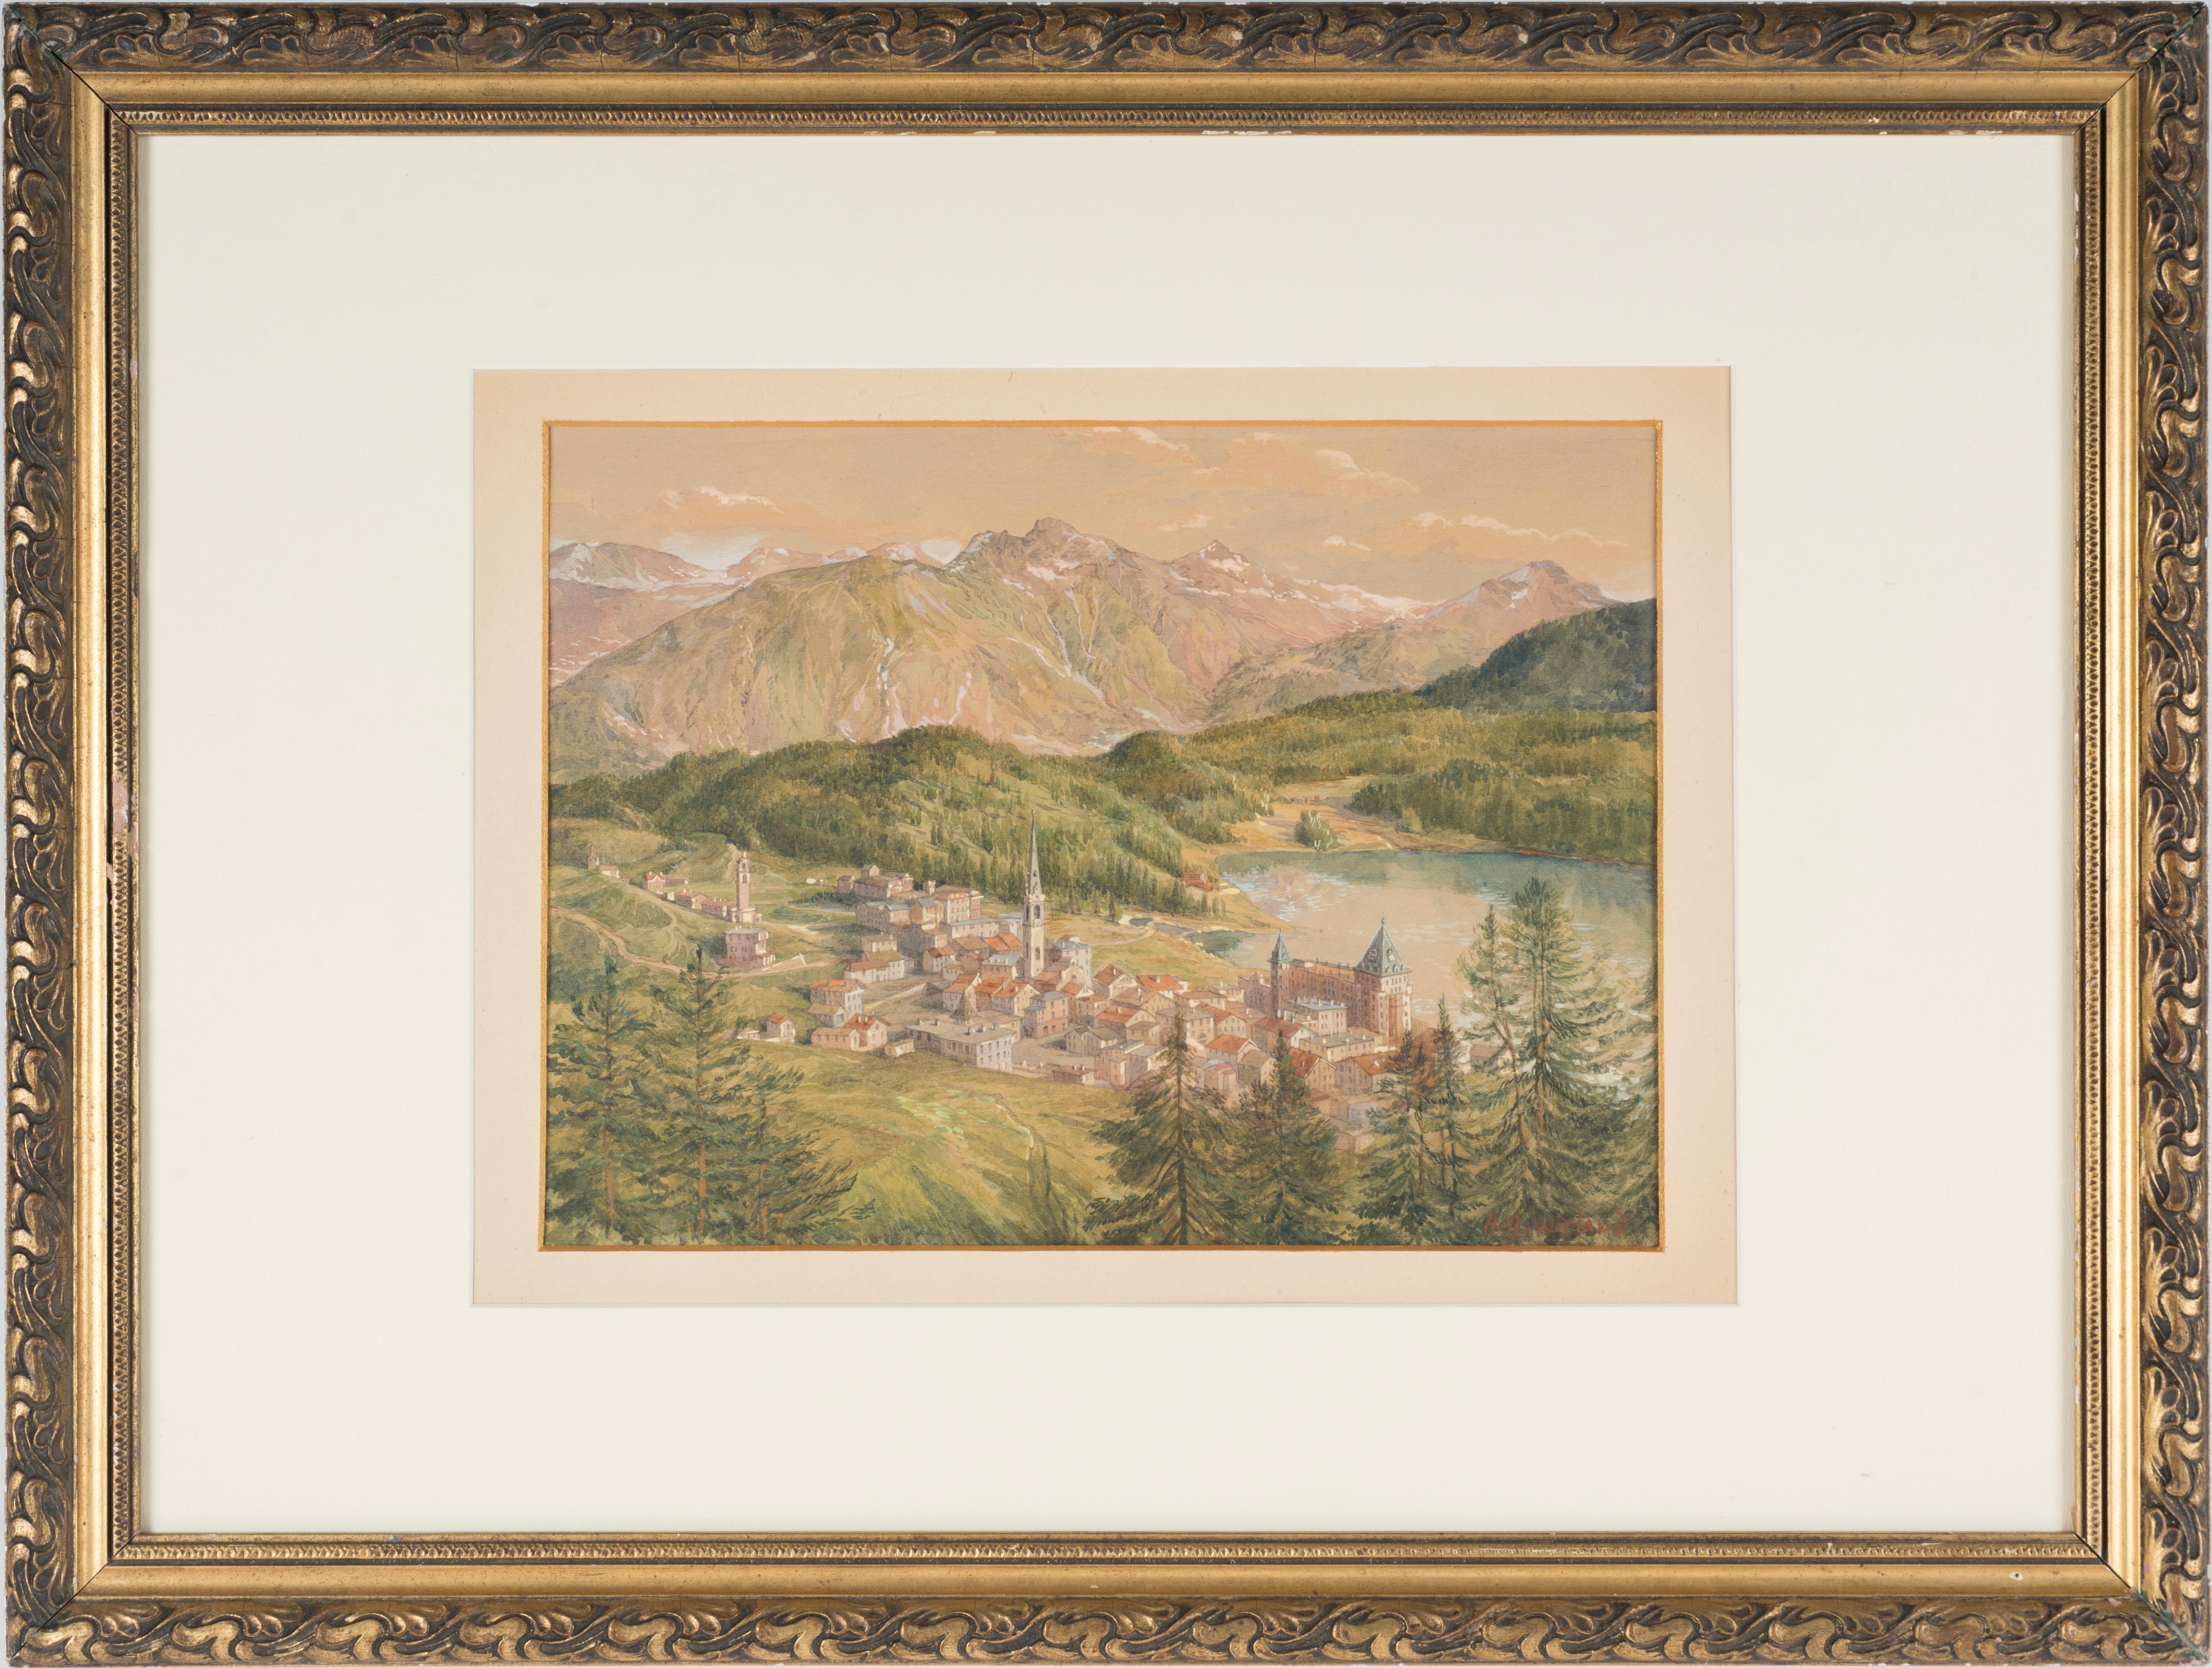 View of Sankt Moritz - Watercolor on paper by H. B. Wieland - 1900/1920 - Art by Hans Beat Wieland